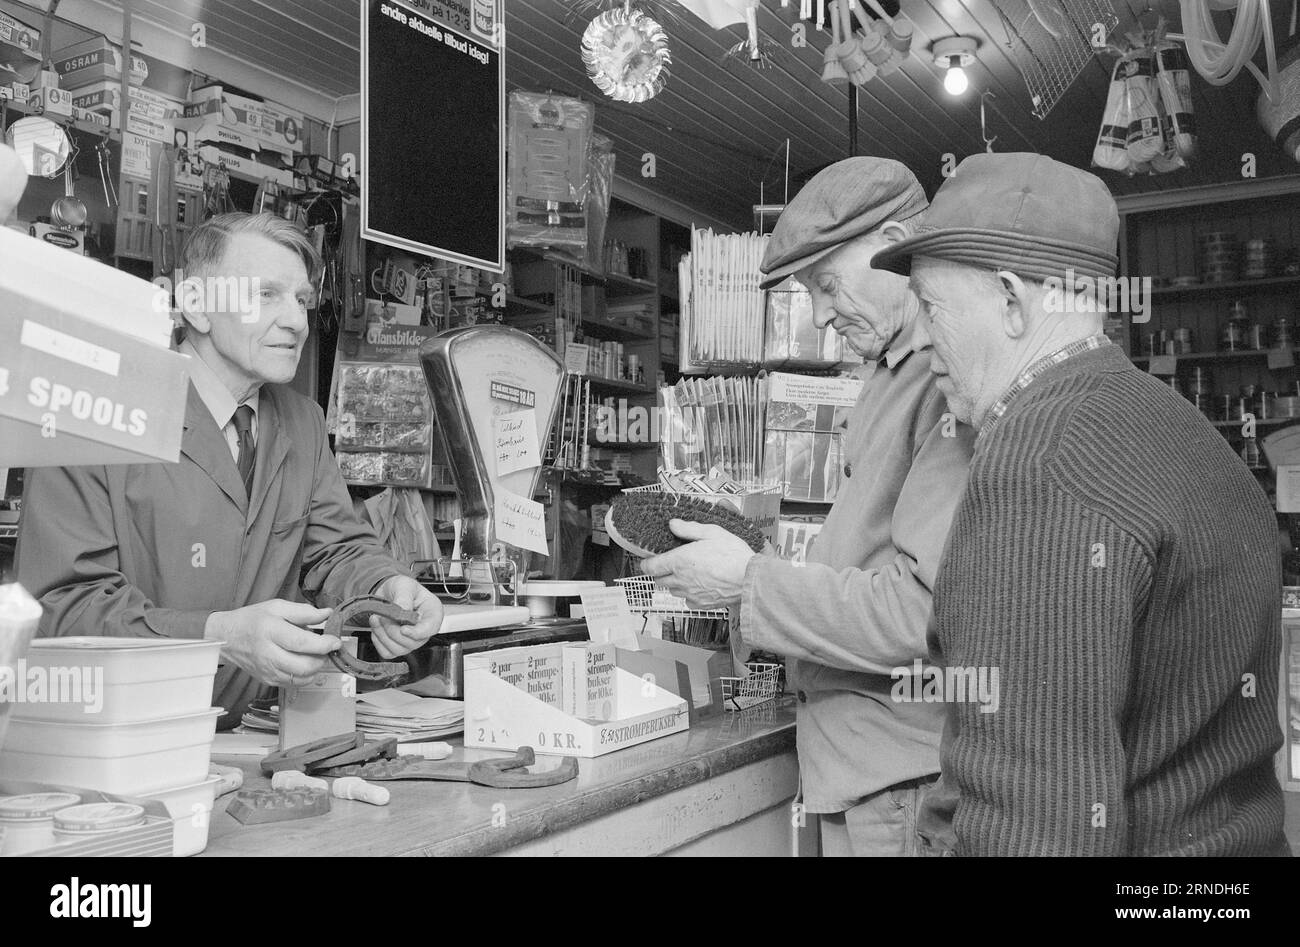 Actual 03 - 4 - 1974: Kjöpmann's protest against the chaseTake it easy at E18 Land trader Bjarne Eriksen will keep the conversation going over the counter. Hence the sign 'Take it easy buy'.  Eriksen's rarer range of goods is assessed with the knowledge of pensioners Erling Bjørnstad and Olaves Smerkerud, former blacksmiths in the village. They take a trip to the store every day. SAs the pictures show, there is nothing to say about the product selection at Eriksen.  Photo: Ivar Aaserud / Aktuell / NTB ***PHOTO NOT IMAGE PROCESSED*** This text has been automatically translated! Stock Photo